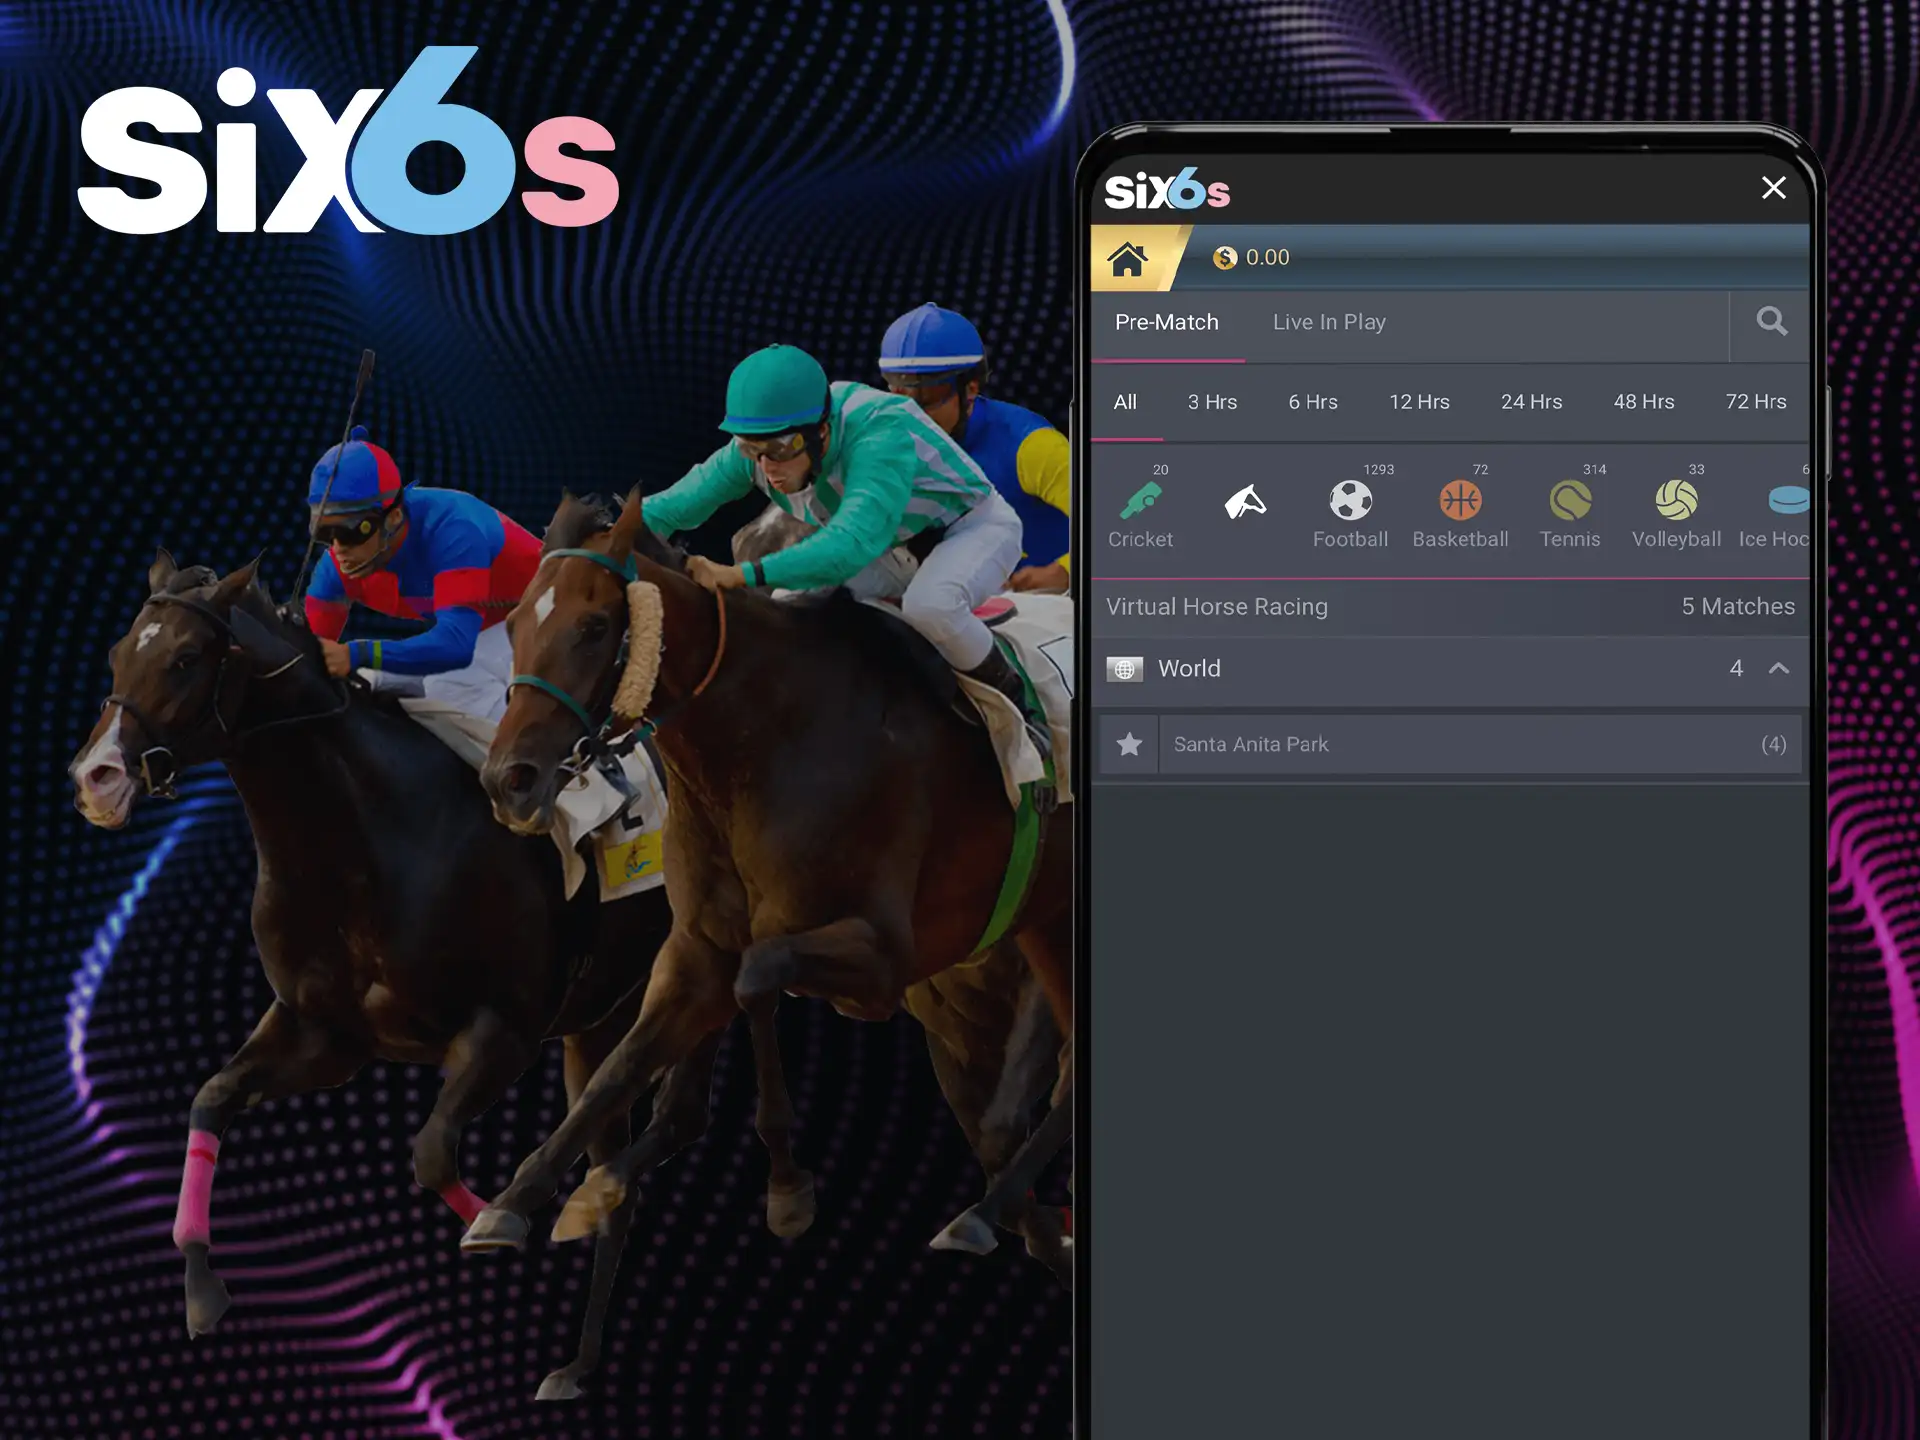 Place bets with Six6s on specific sports like horse racing.